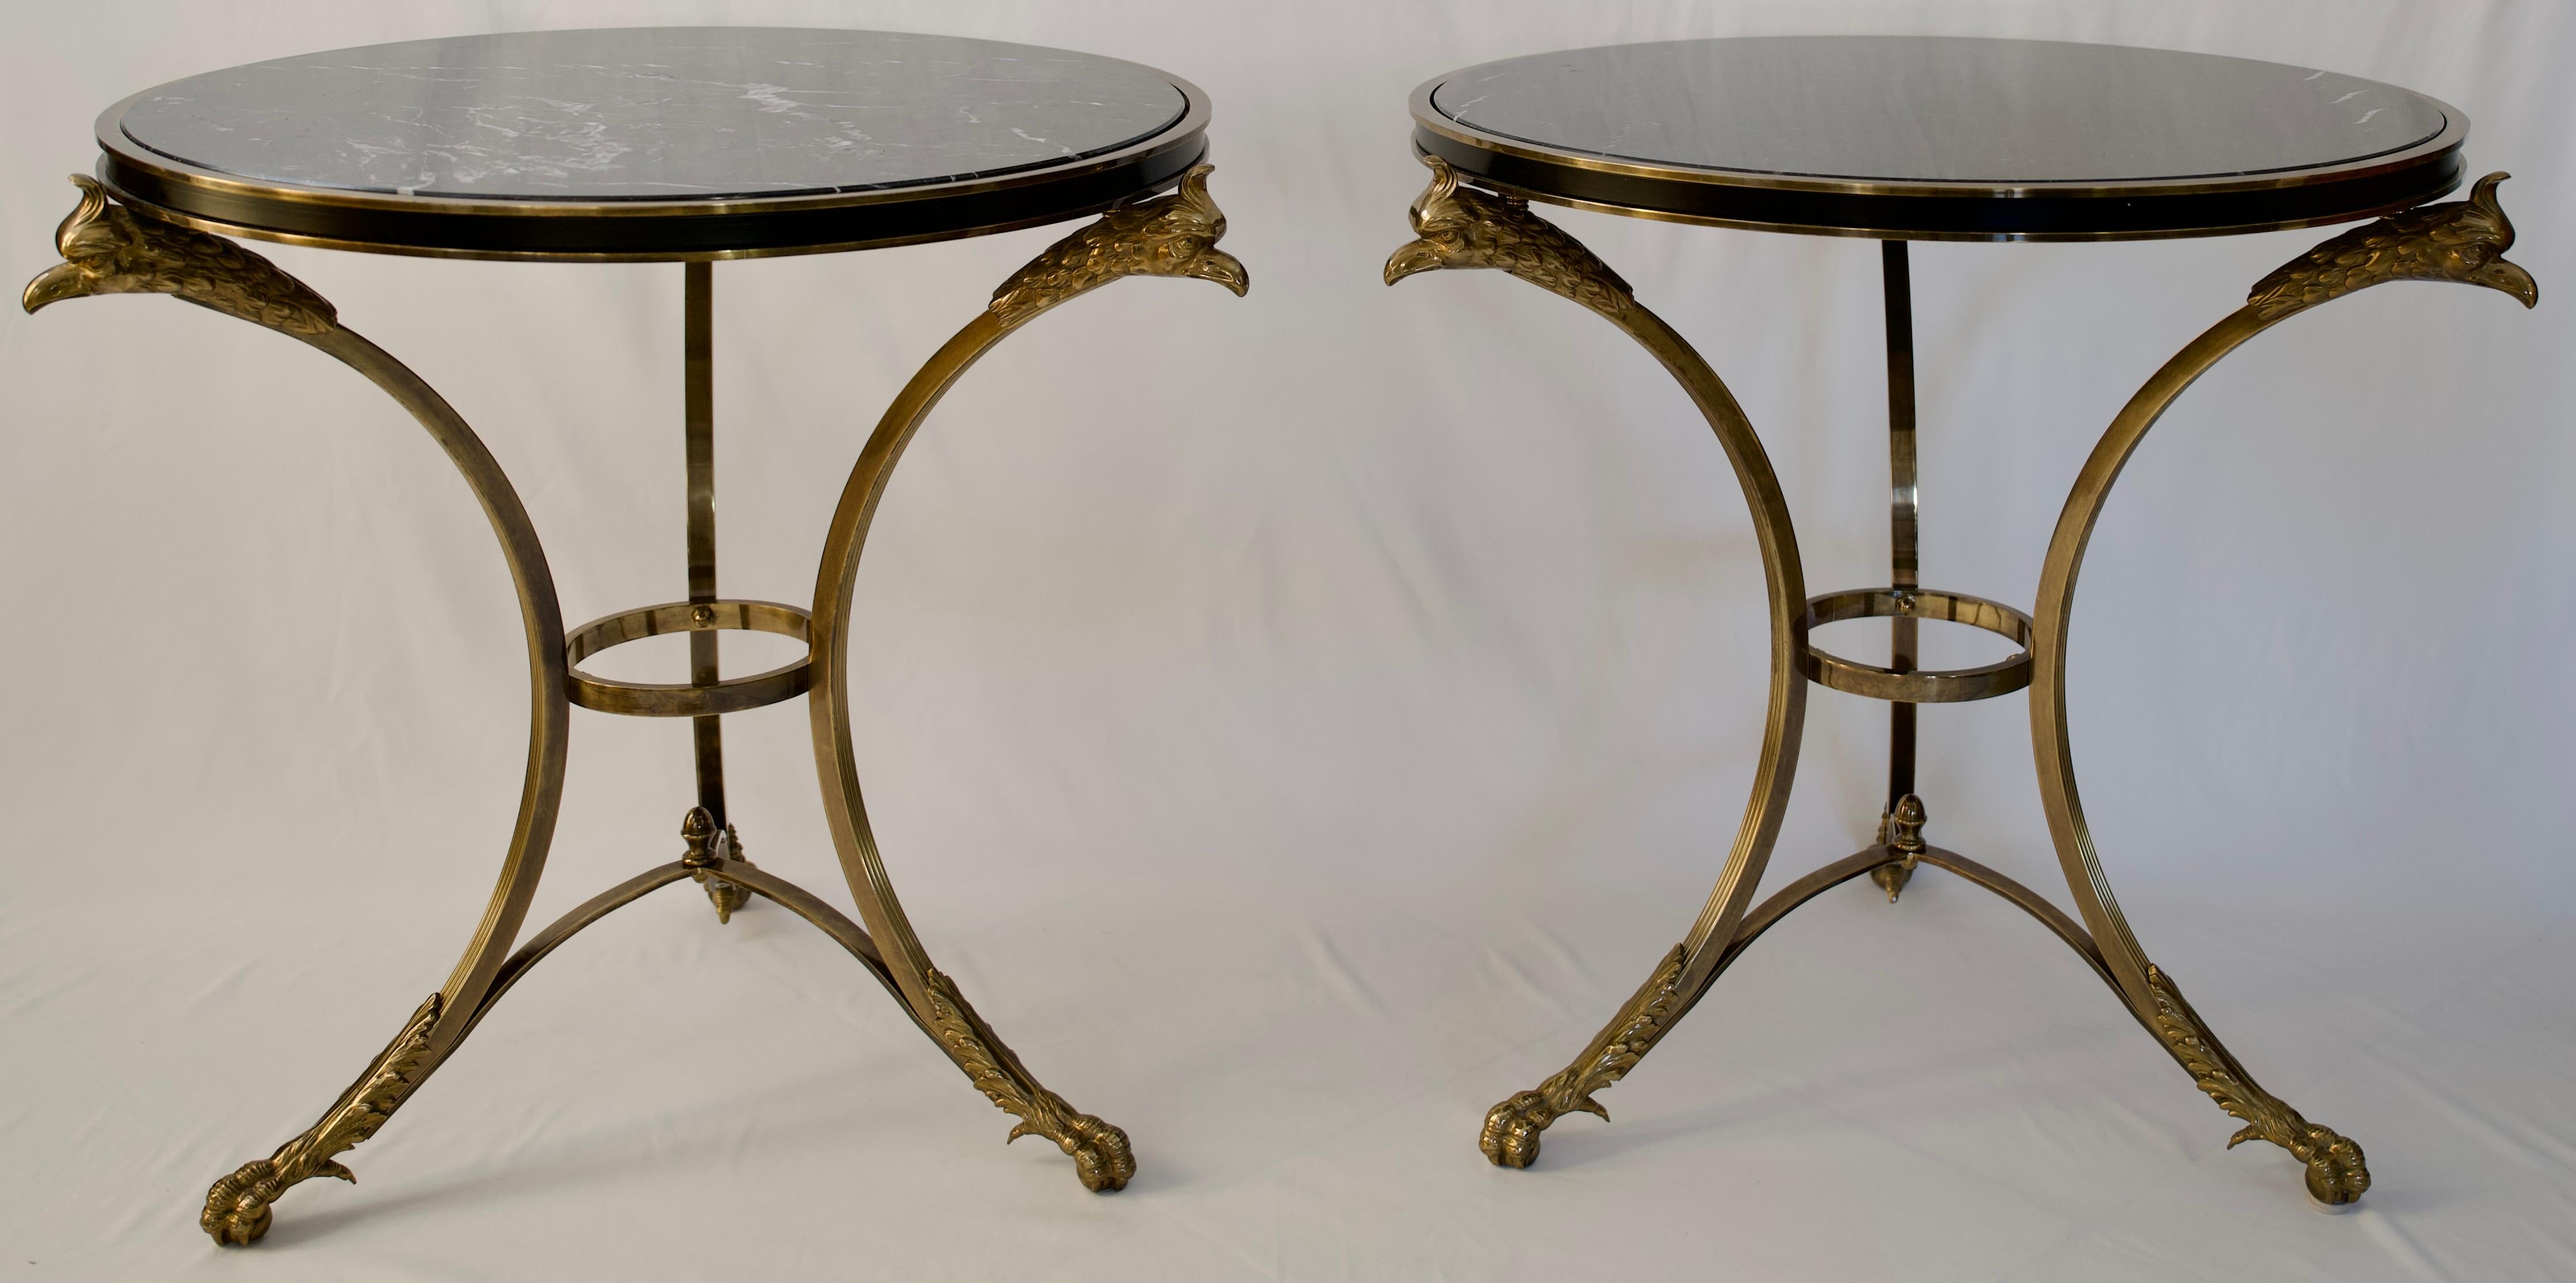 A very fine pair of end tables or side tables by Alberto Orlandi or pair of Neoclassical style gueridon tables  with marble top. These fine quality end tables feature with phoenix head and hoof motifs in brass and steel, circa 1970's.

These stylish